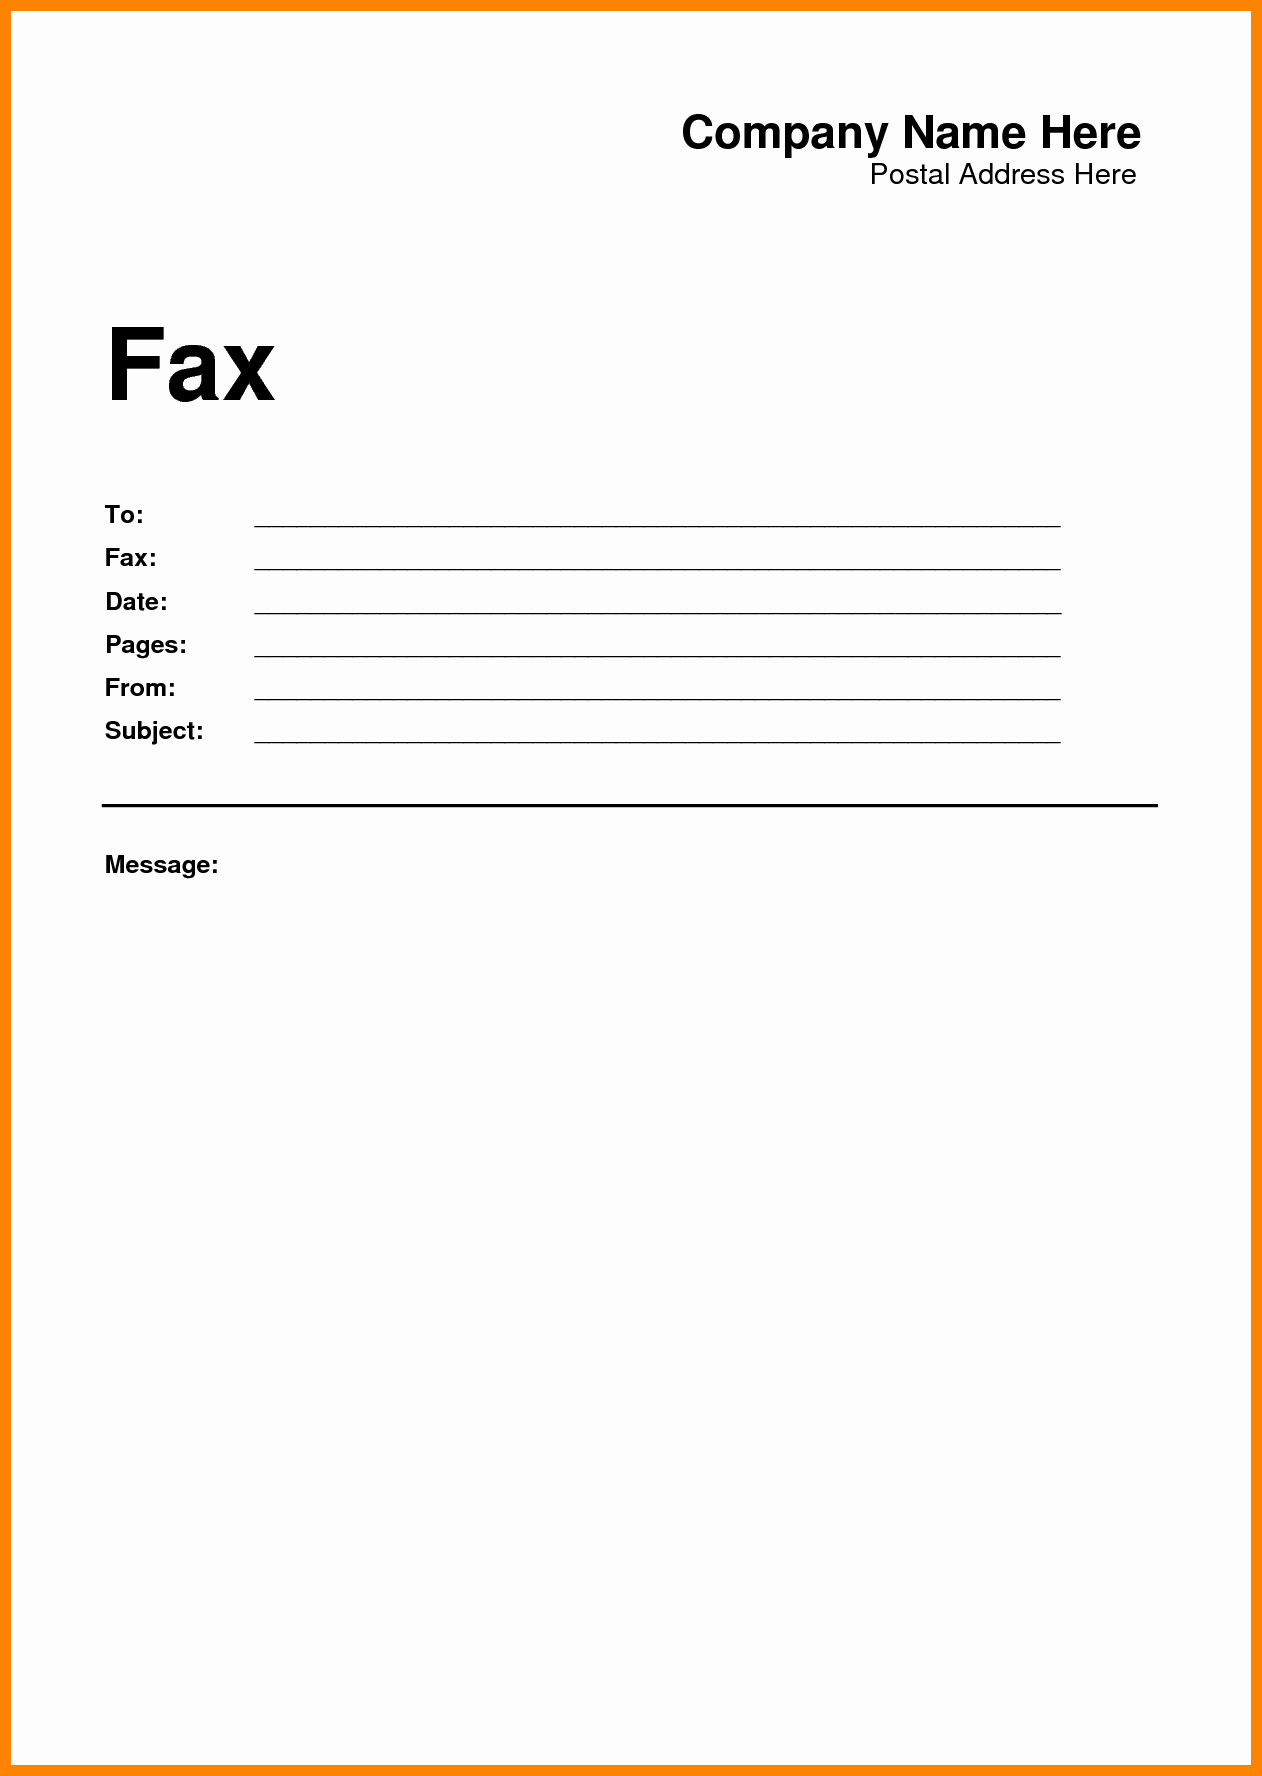 Fax Cover Page Template Best Of 6 Free Fax Cover Sheet